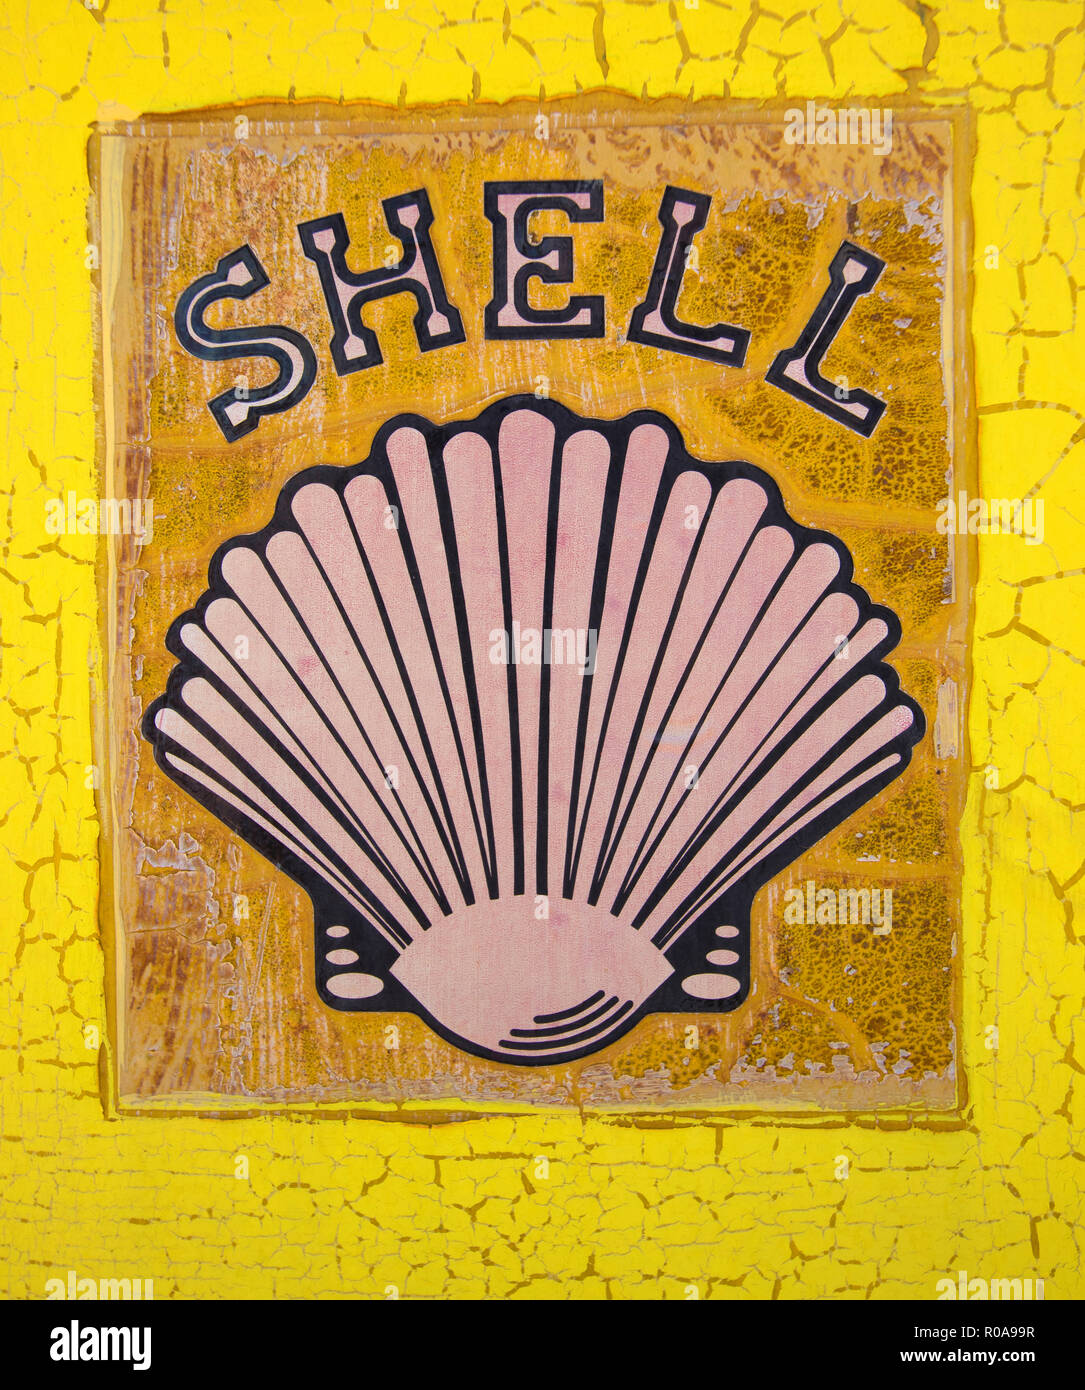 Vintage Shell Oil Company logo on the side of an old yellow petrol bowser pump Stock Photo